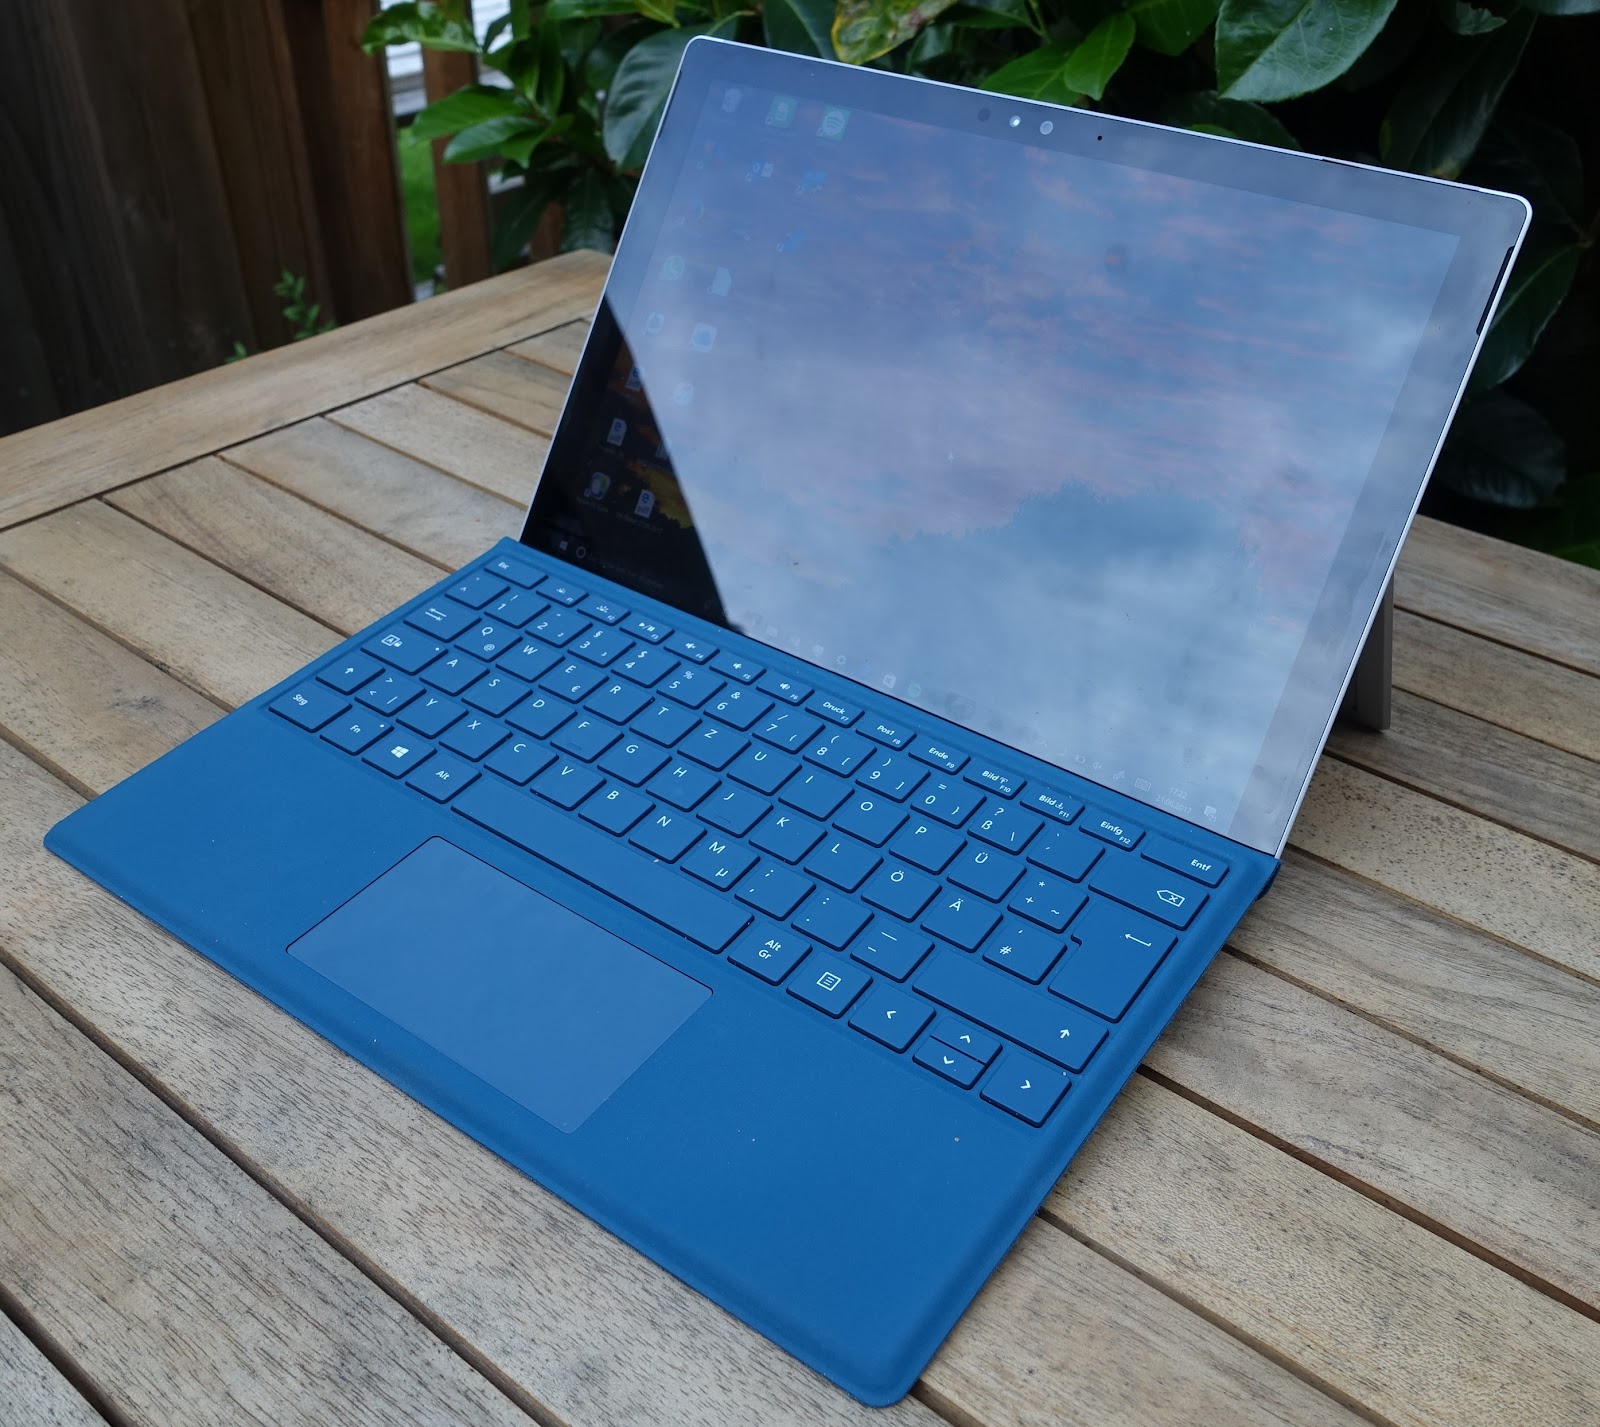 Microsoft Surface Pro 7+ laptop in the blue color is in the wooden desk with open display.